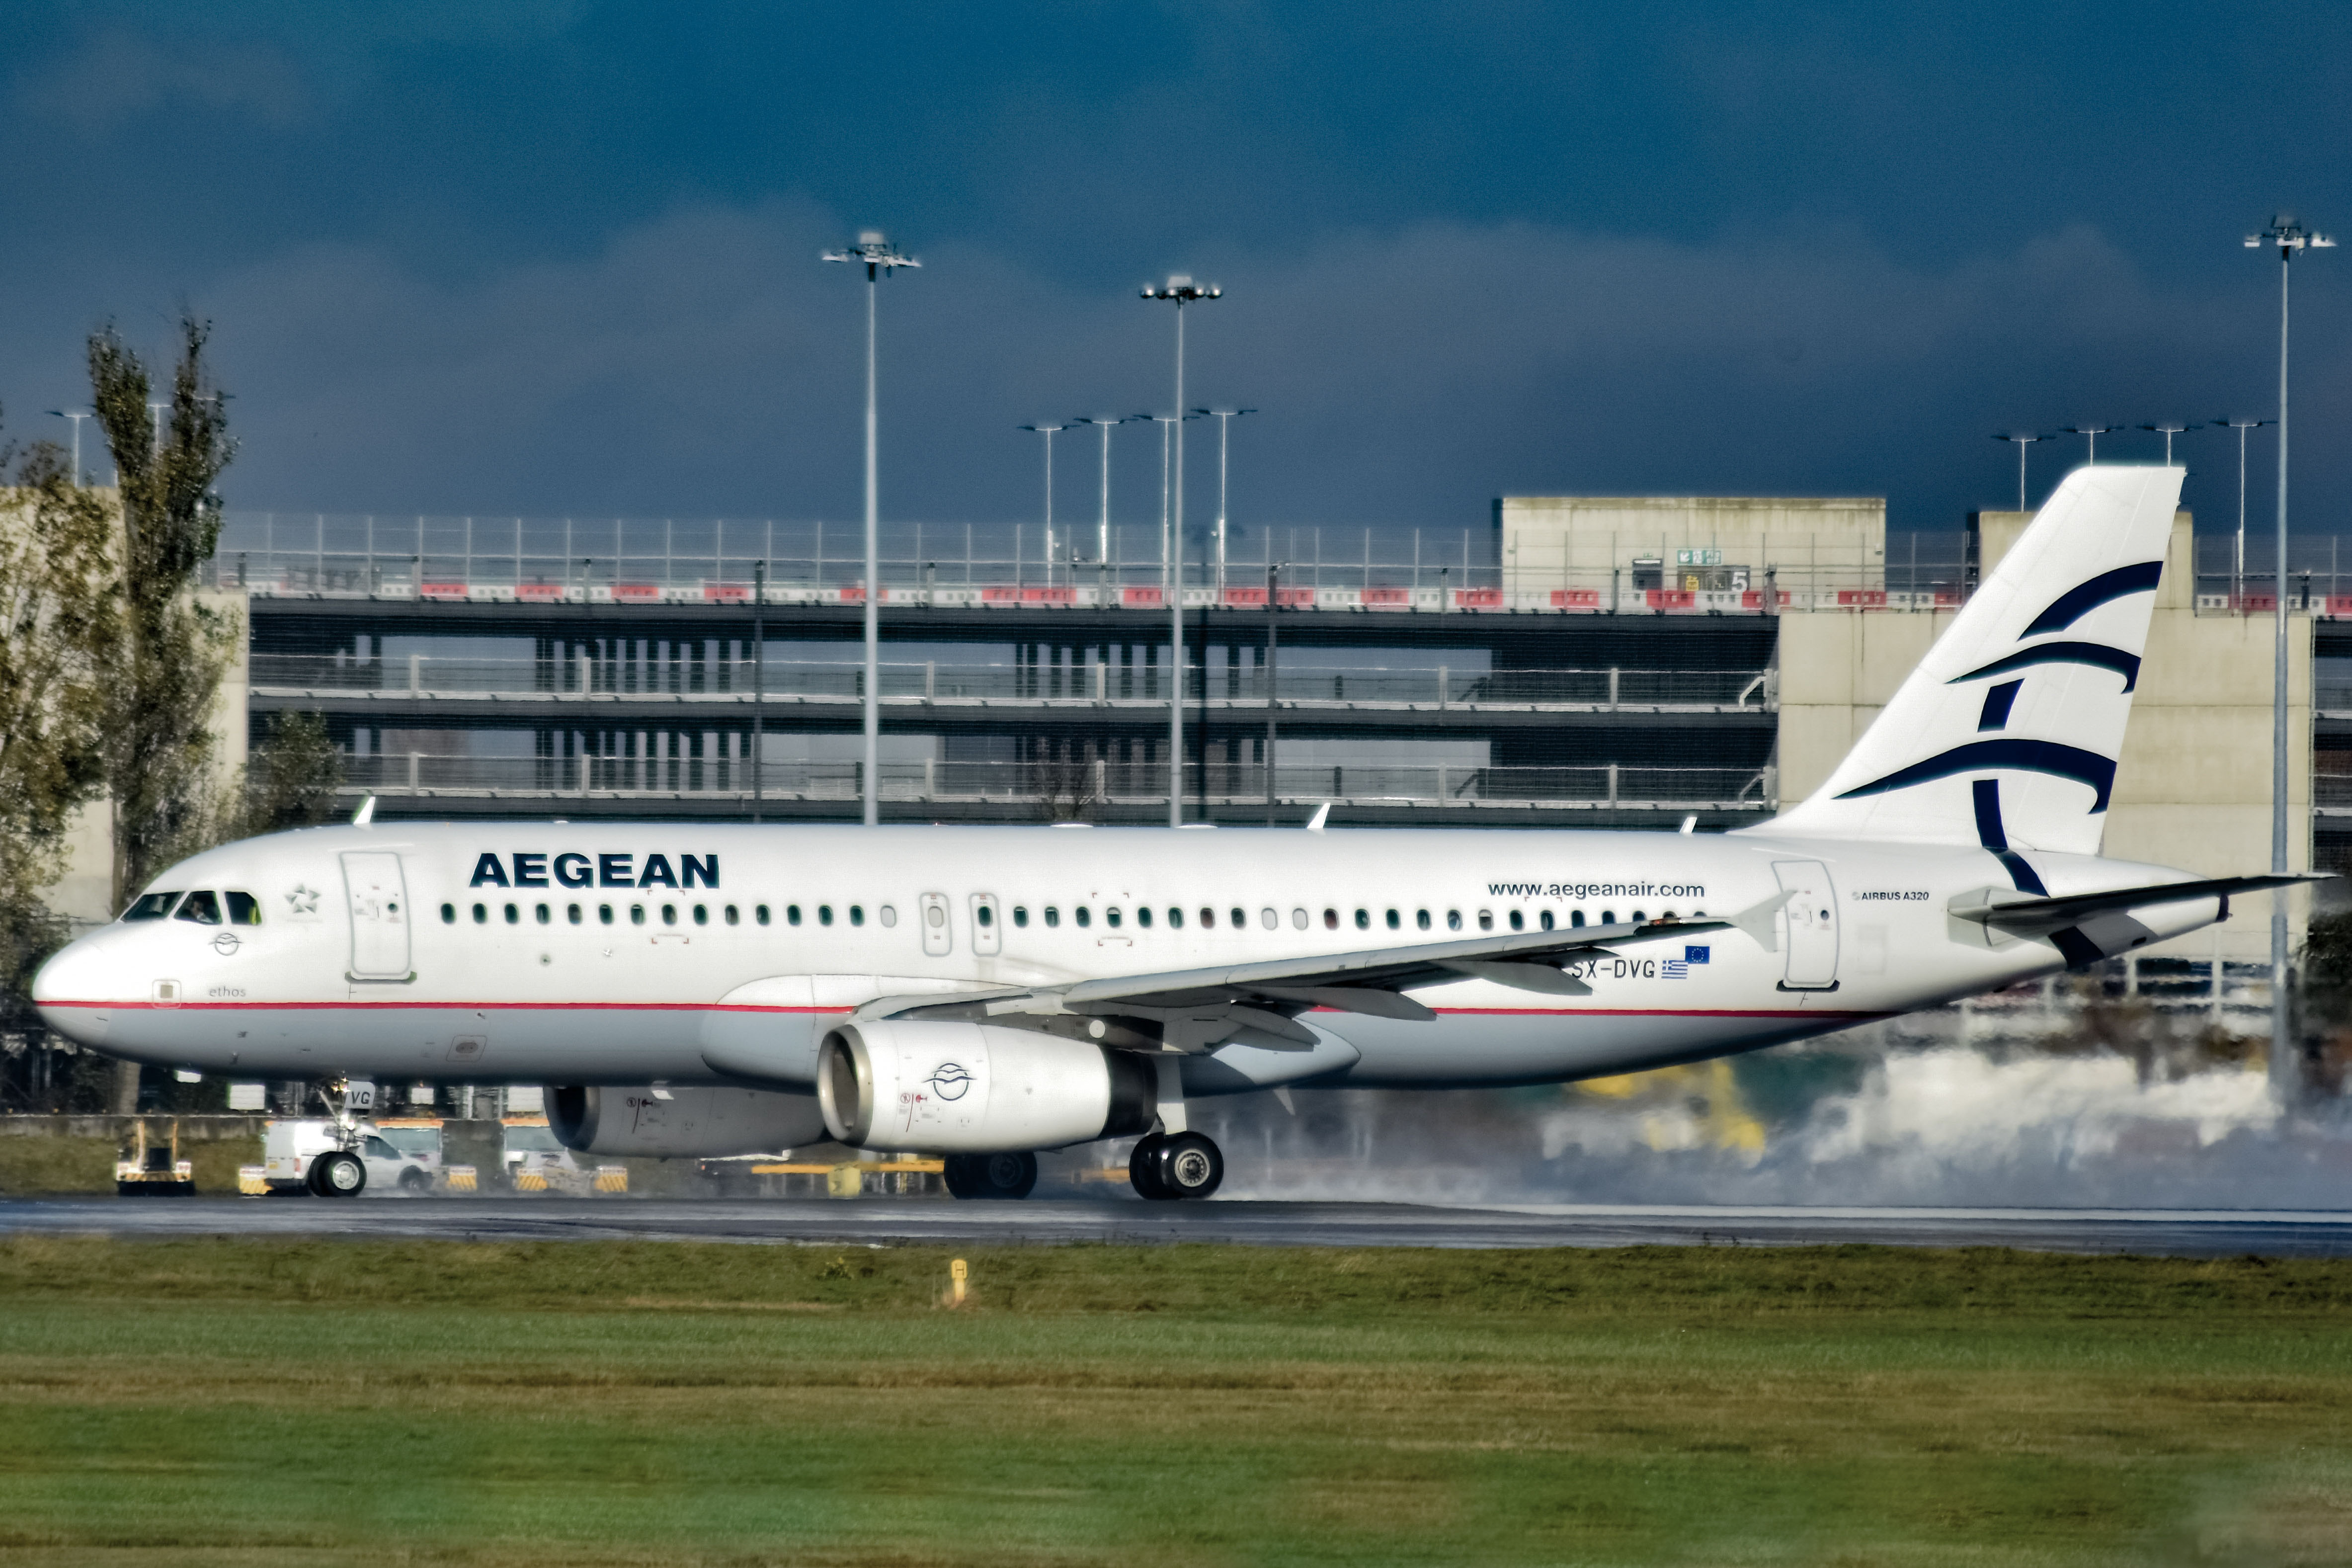 SX-DVG/SXDVG Aegean Airlines Airbus A320 Airframe Information - AVSpotters.com